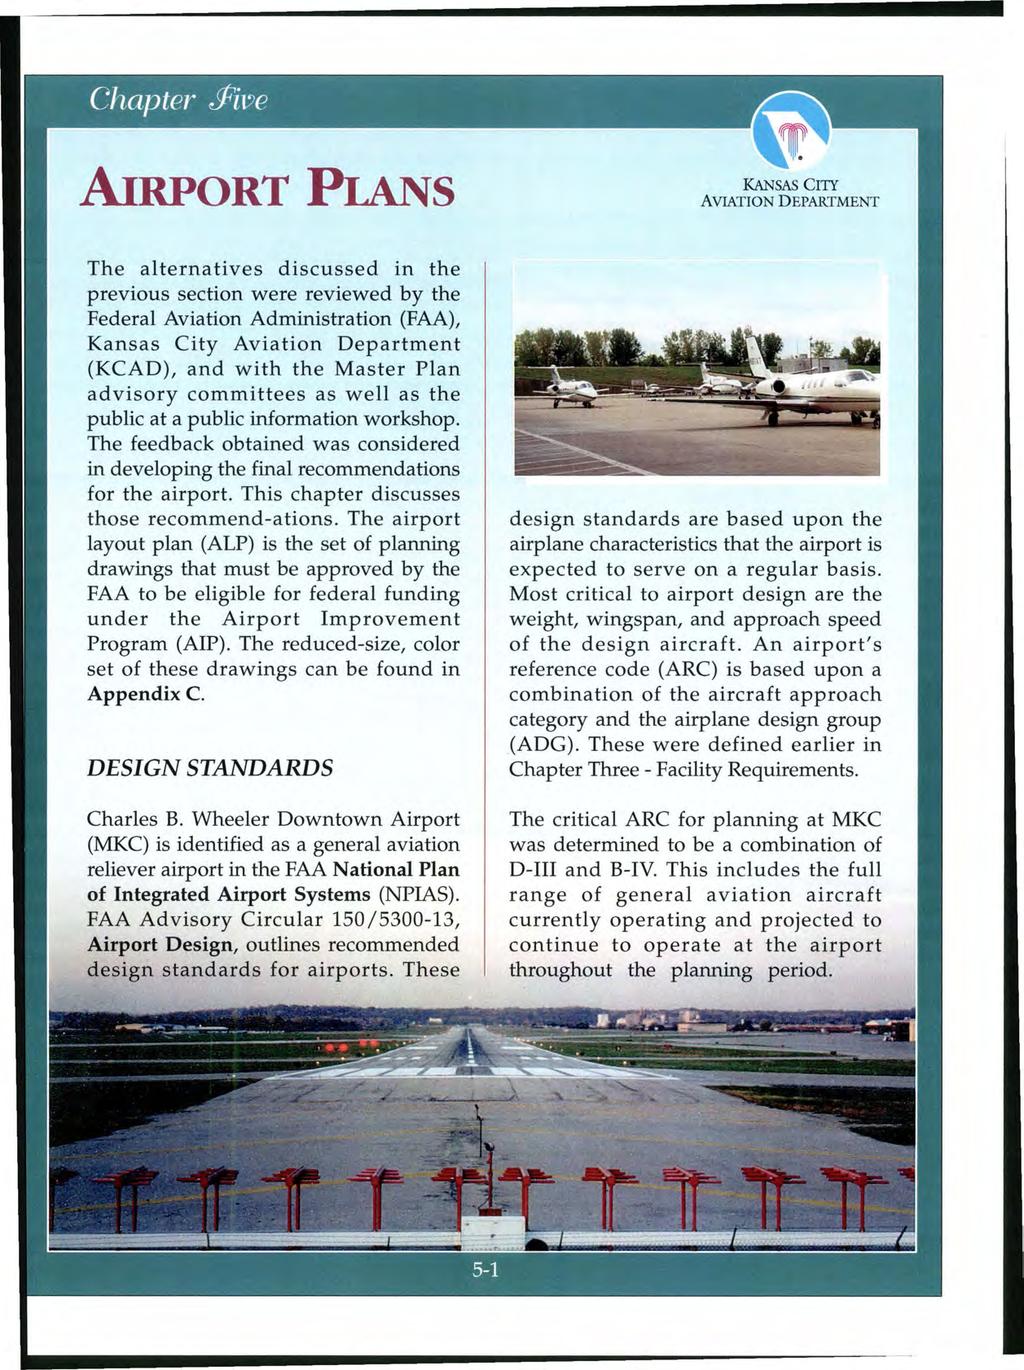 AIRPORT PLANs The alternatives discussed in the previous section were reviewed by the Federal Aviation Administration (FAA), Kansas City Aviation Department (KCAD), and with the Master Plan advisory